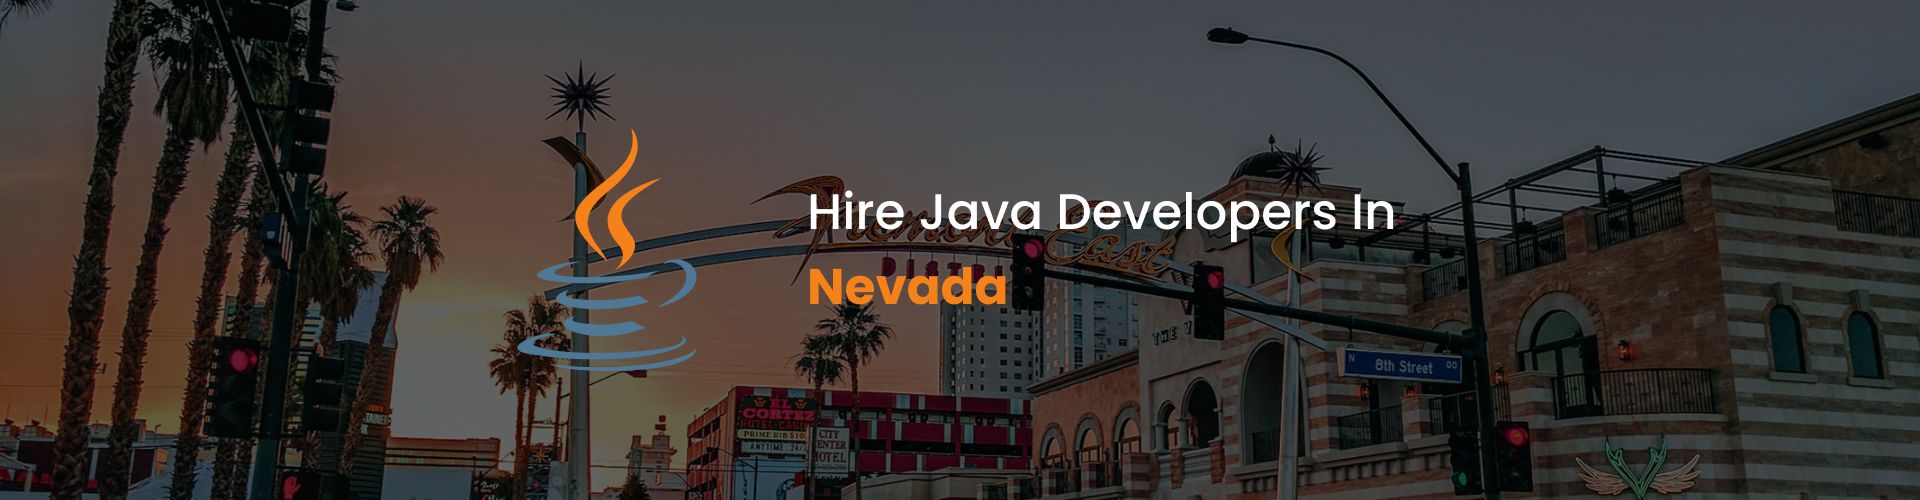 hire java developers in nevada